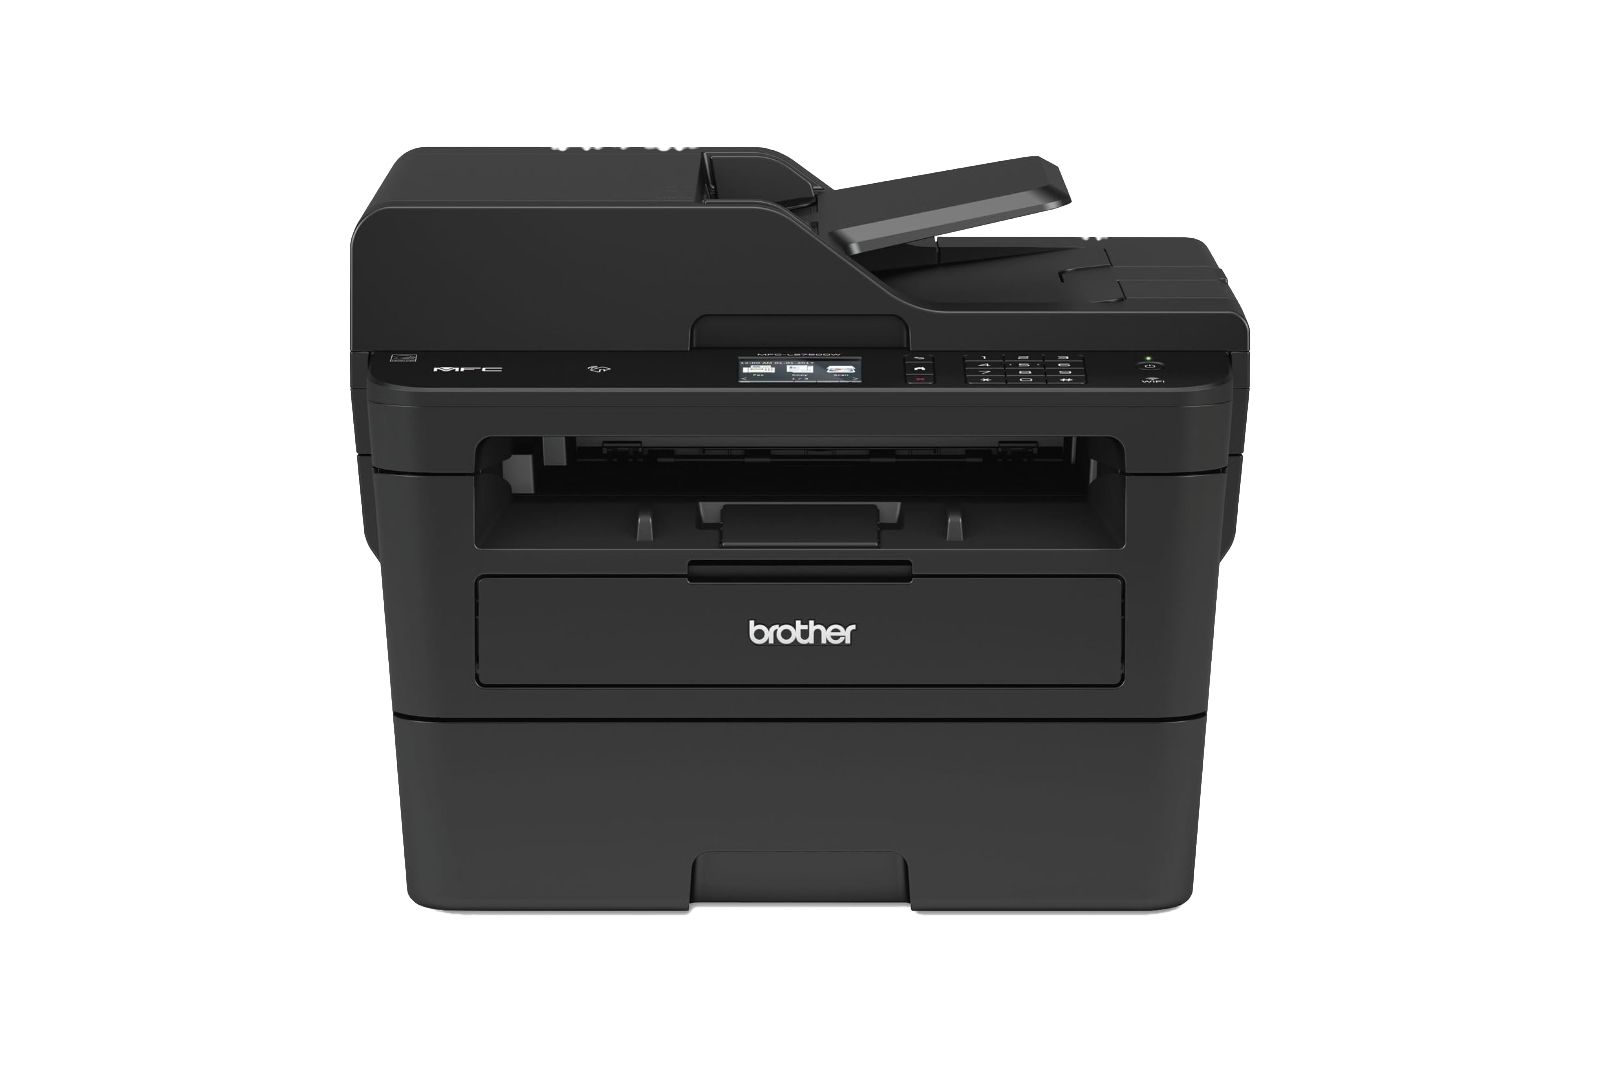 A black printer with a feed tray and small screen at the top, and an opening at the front.